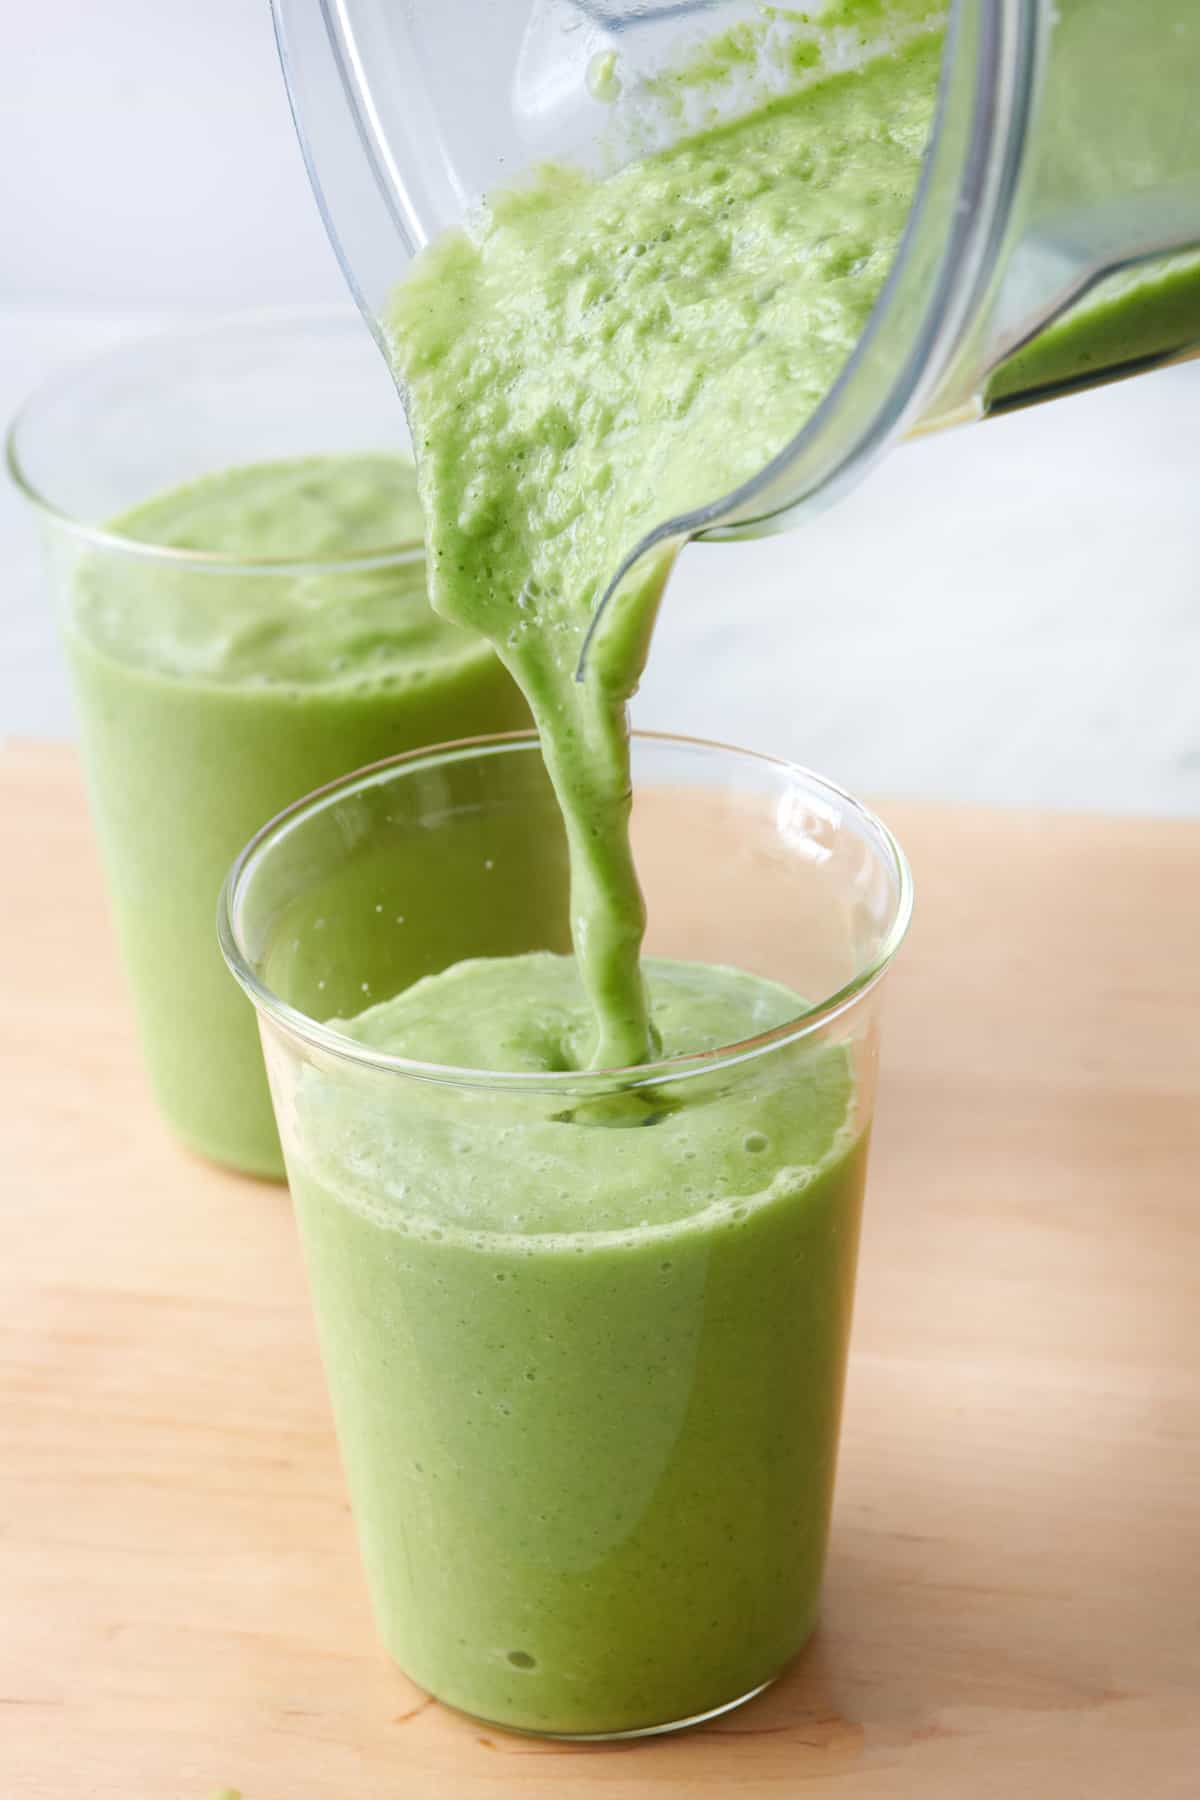 Avocado smoothie being poured into two glasses from blender.